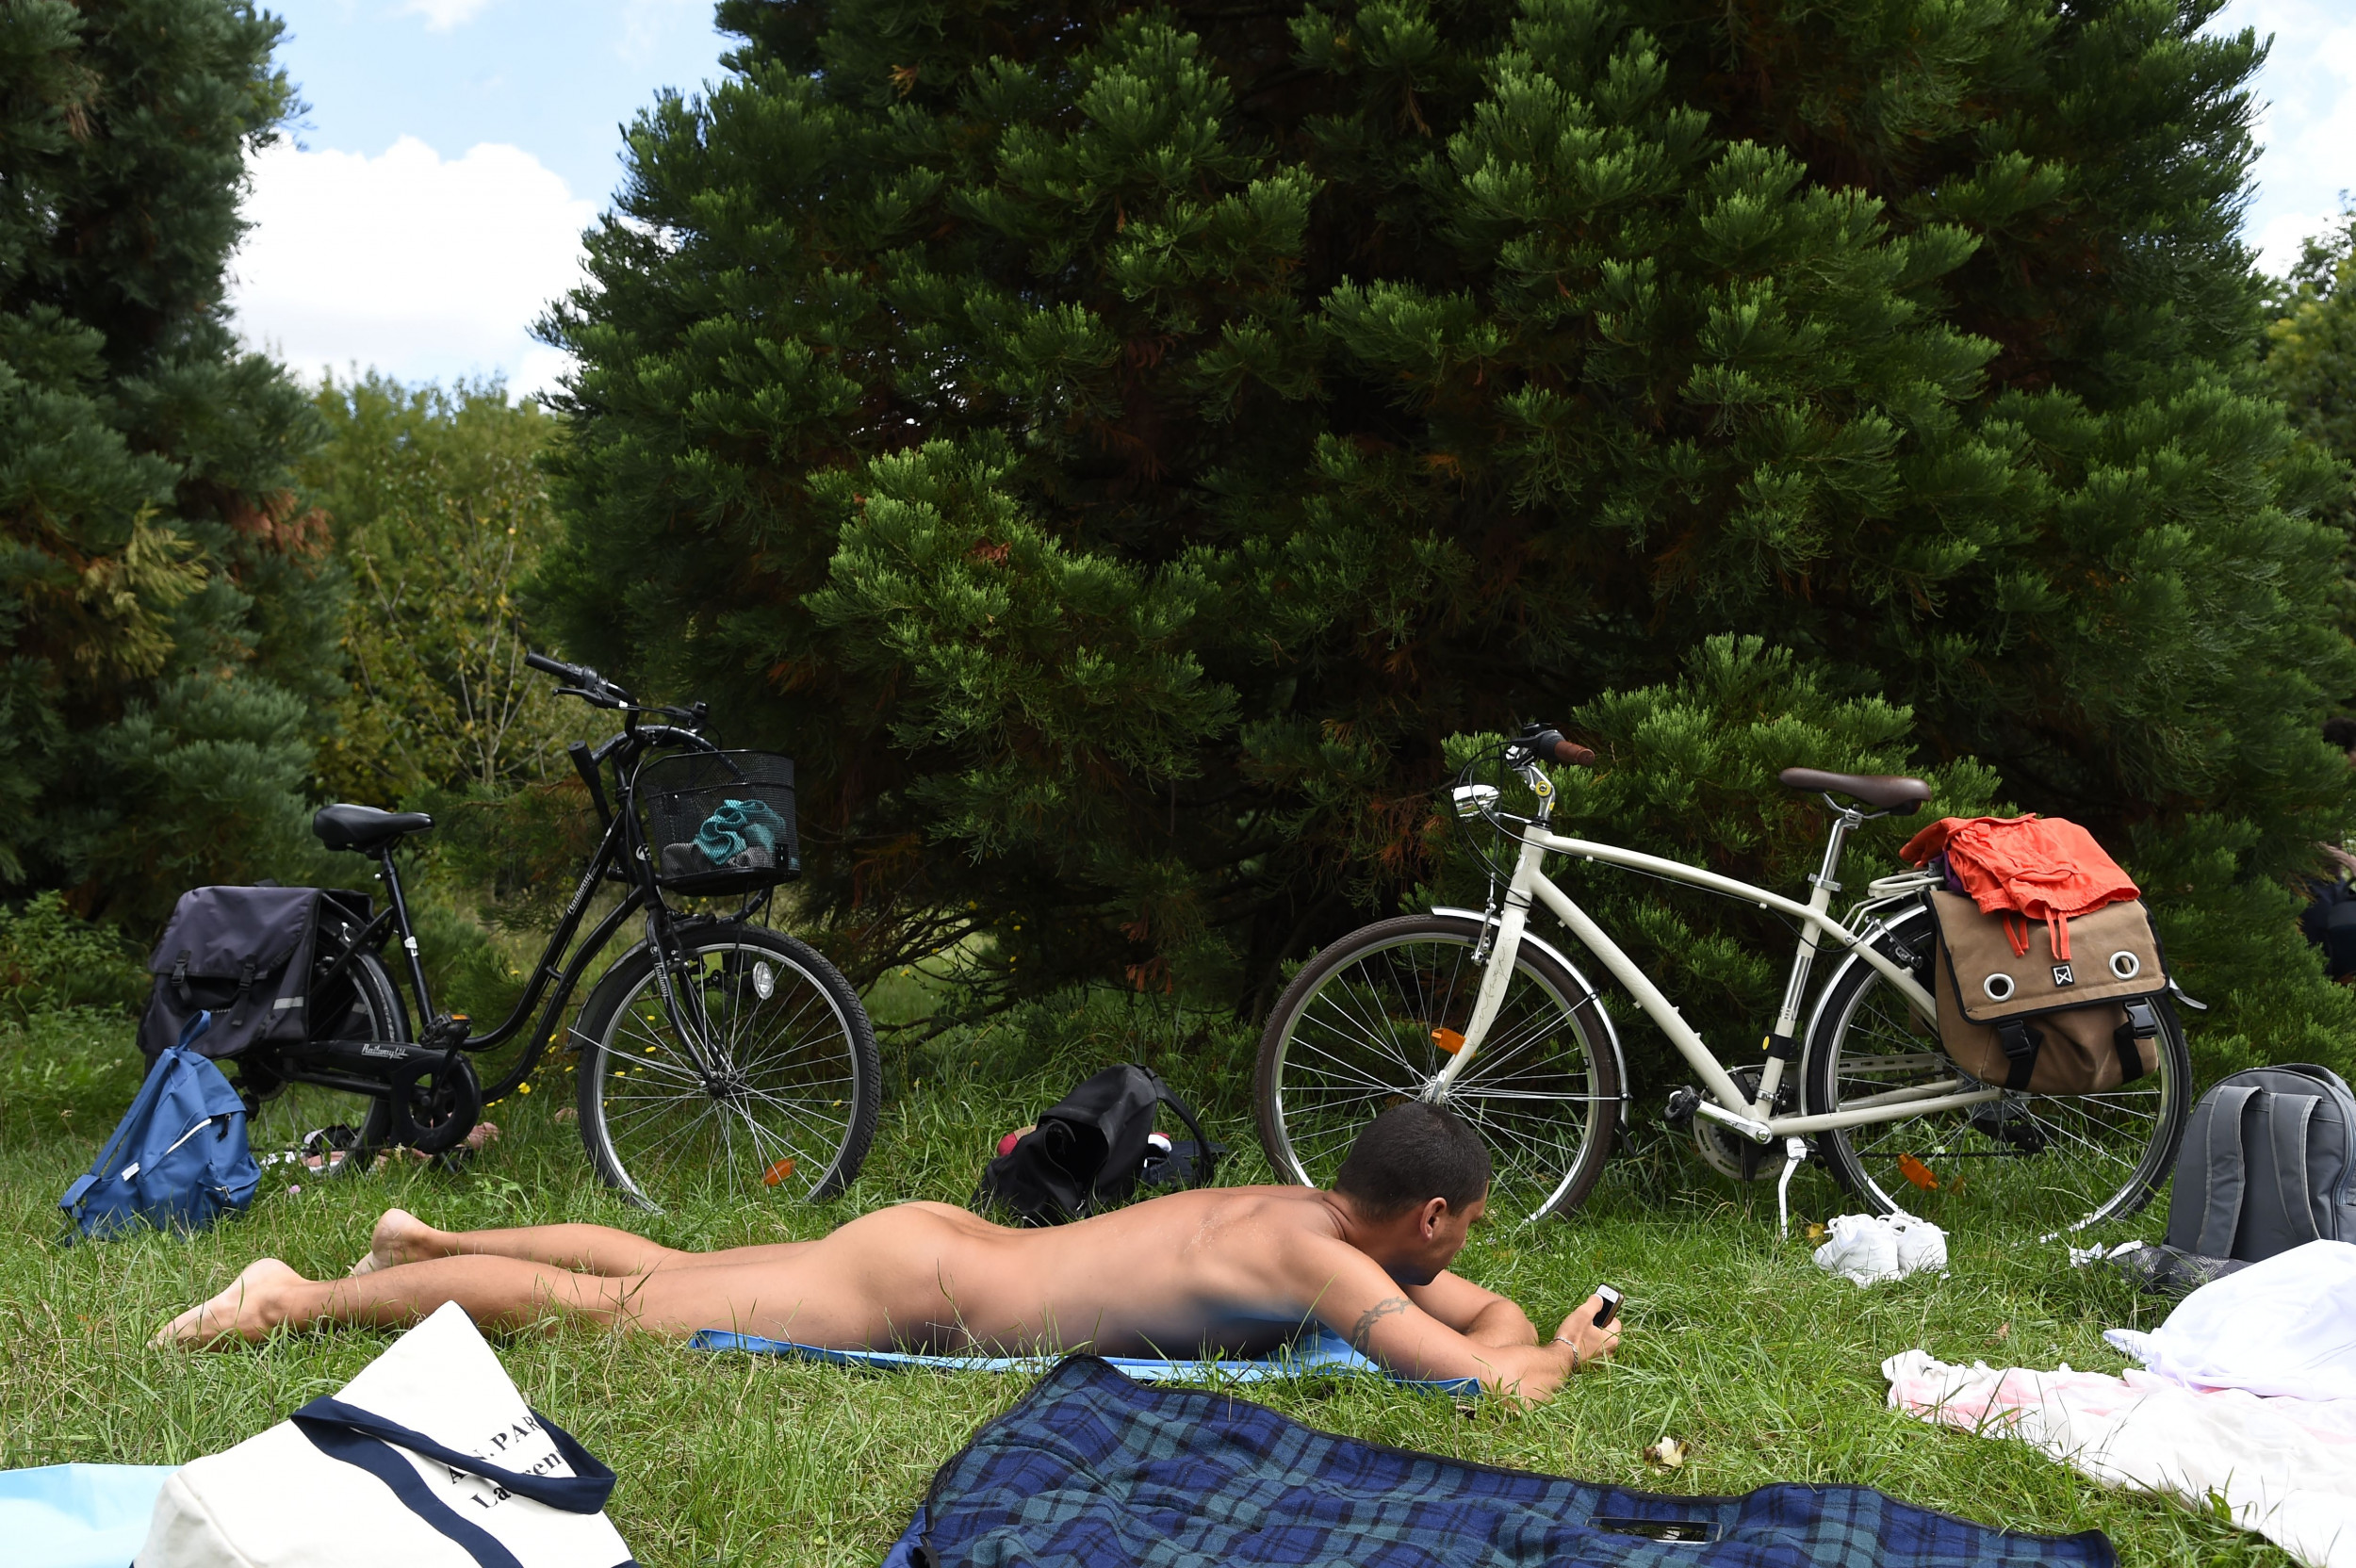 Perverts Wanting To Sneak A Peek Are Ruining Paris Parks Nude Zone, Say Naturists